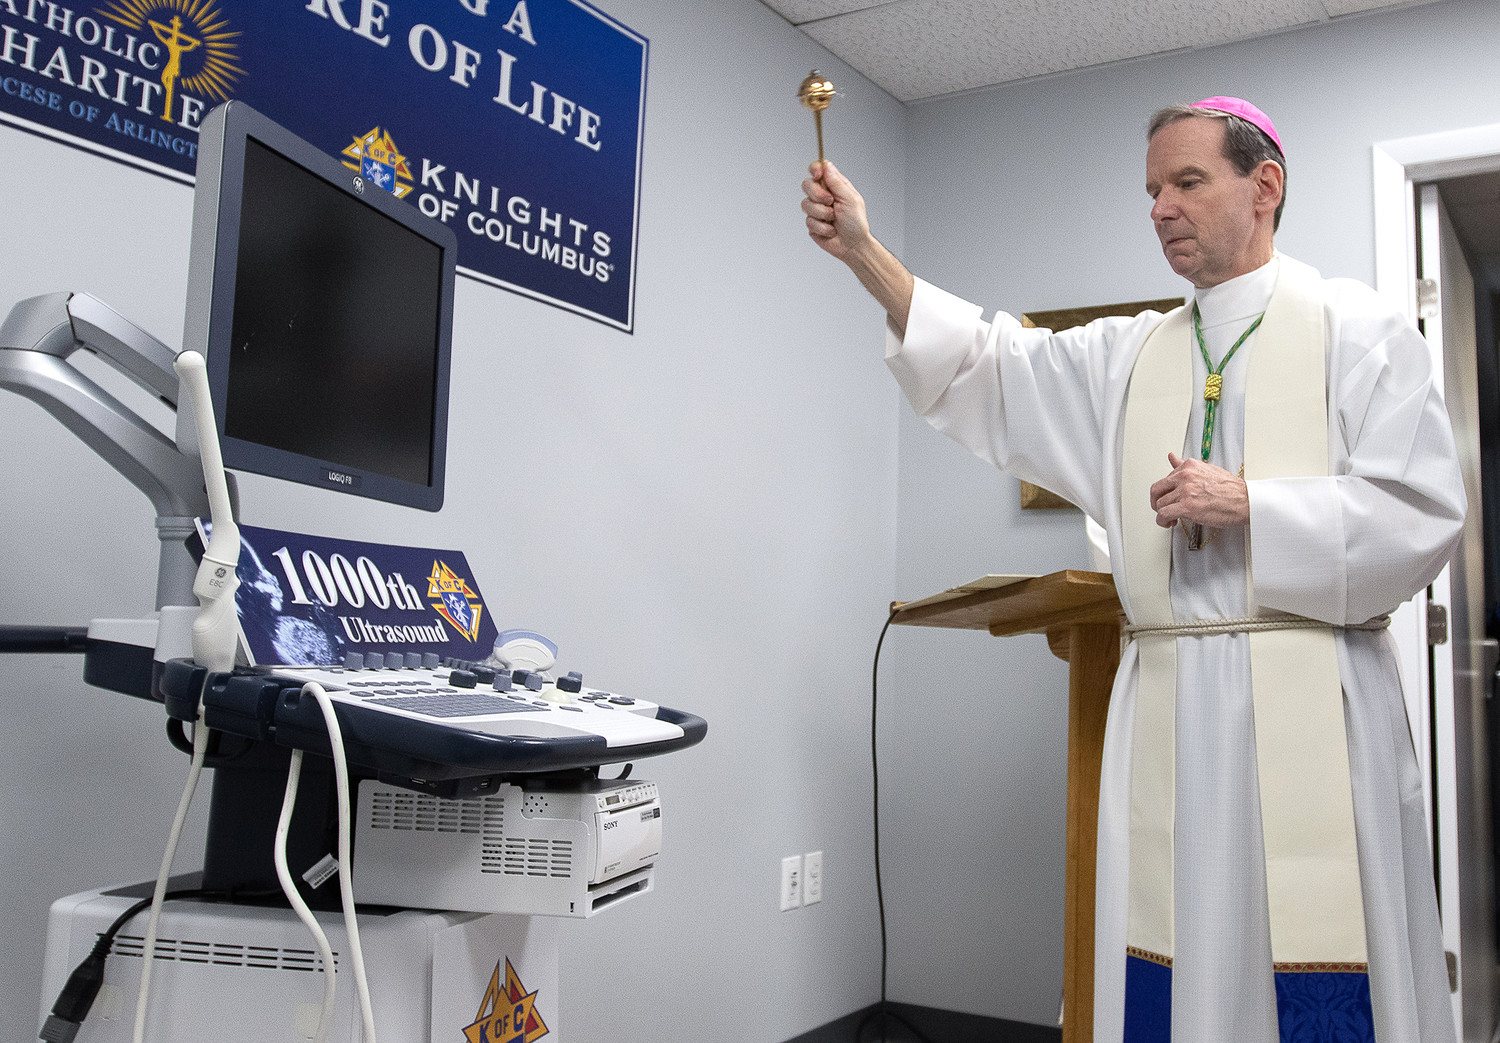 Bishop Michael F. Burbidge of Arlington, Va., blesses the new ultrasound machine for the Mother of Mercy Free Clinic in Manassas, Virginia